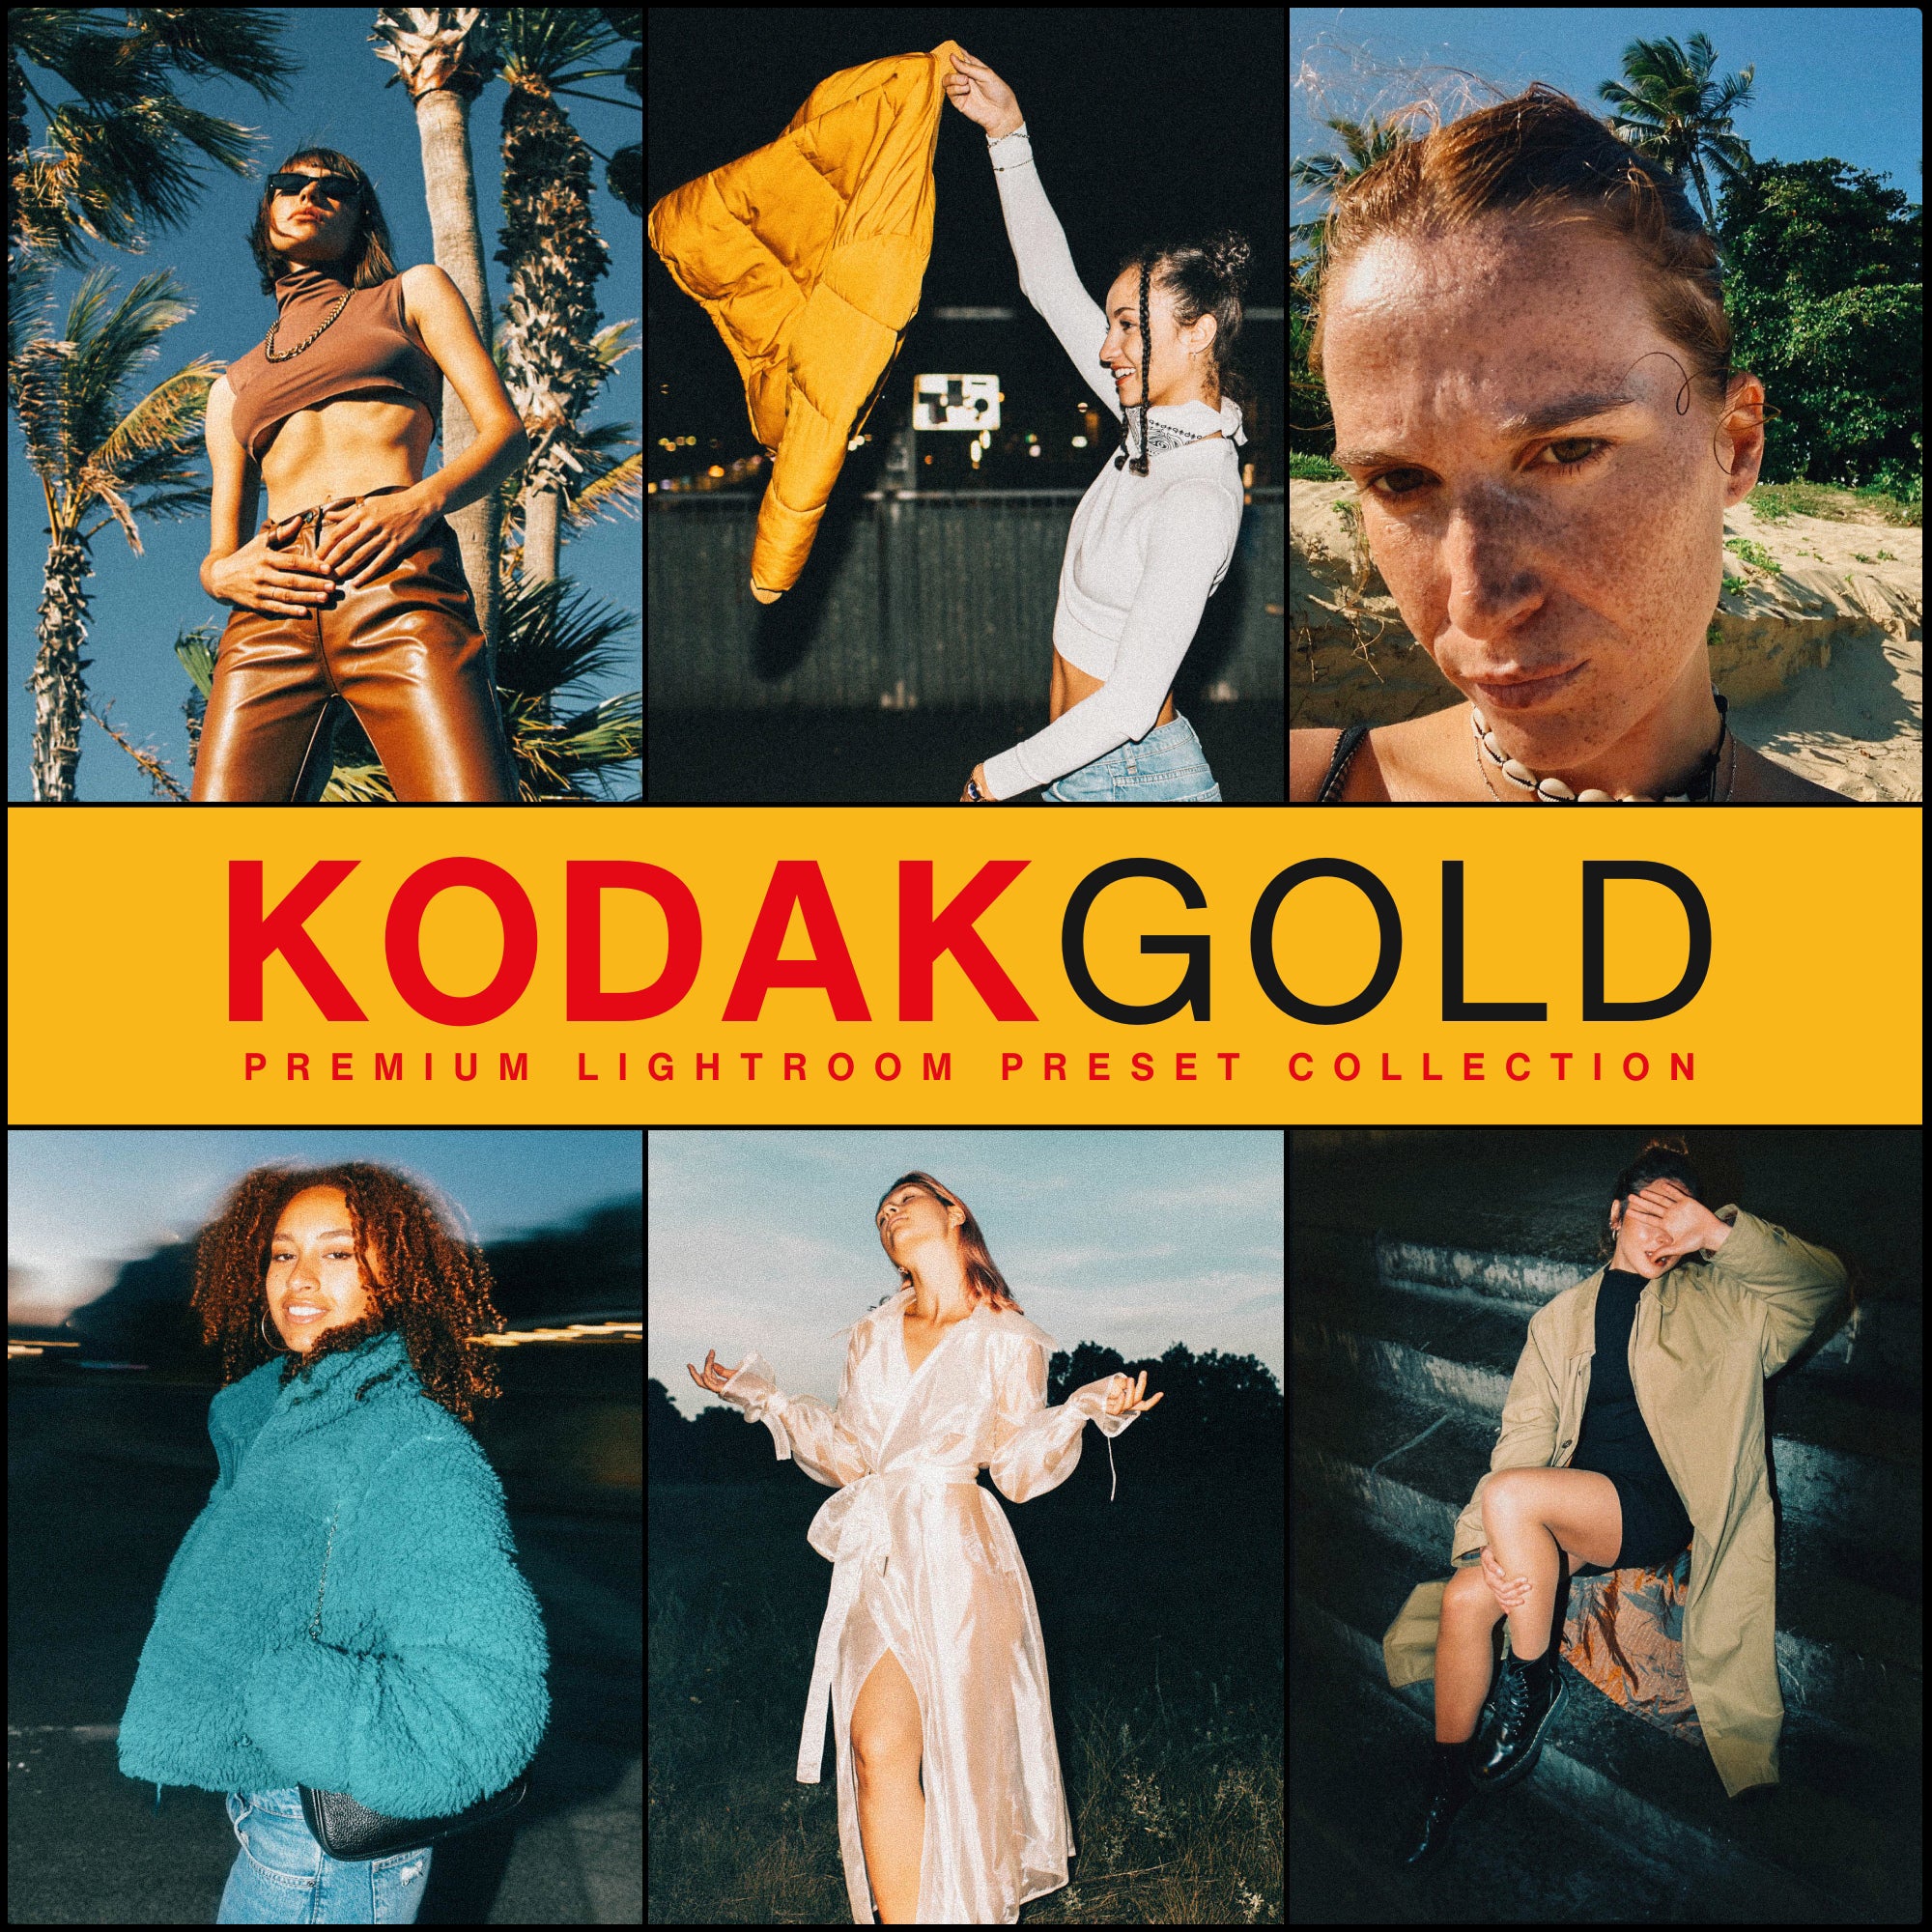 The Best Kodak Gold Film Lightroom Presets For Photographers and Instagram Influencers Photo Editing In Adobe Lightroom By Lou And Marks Presets